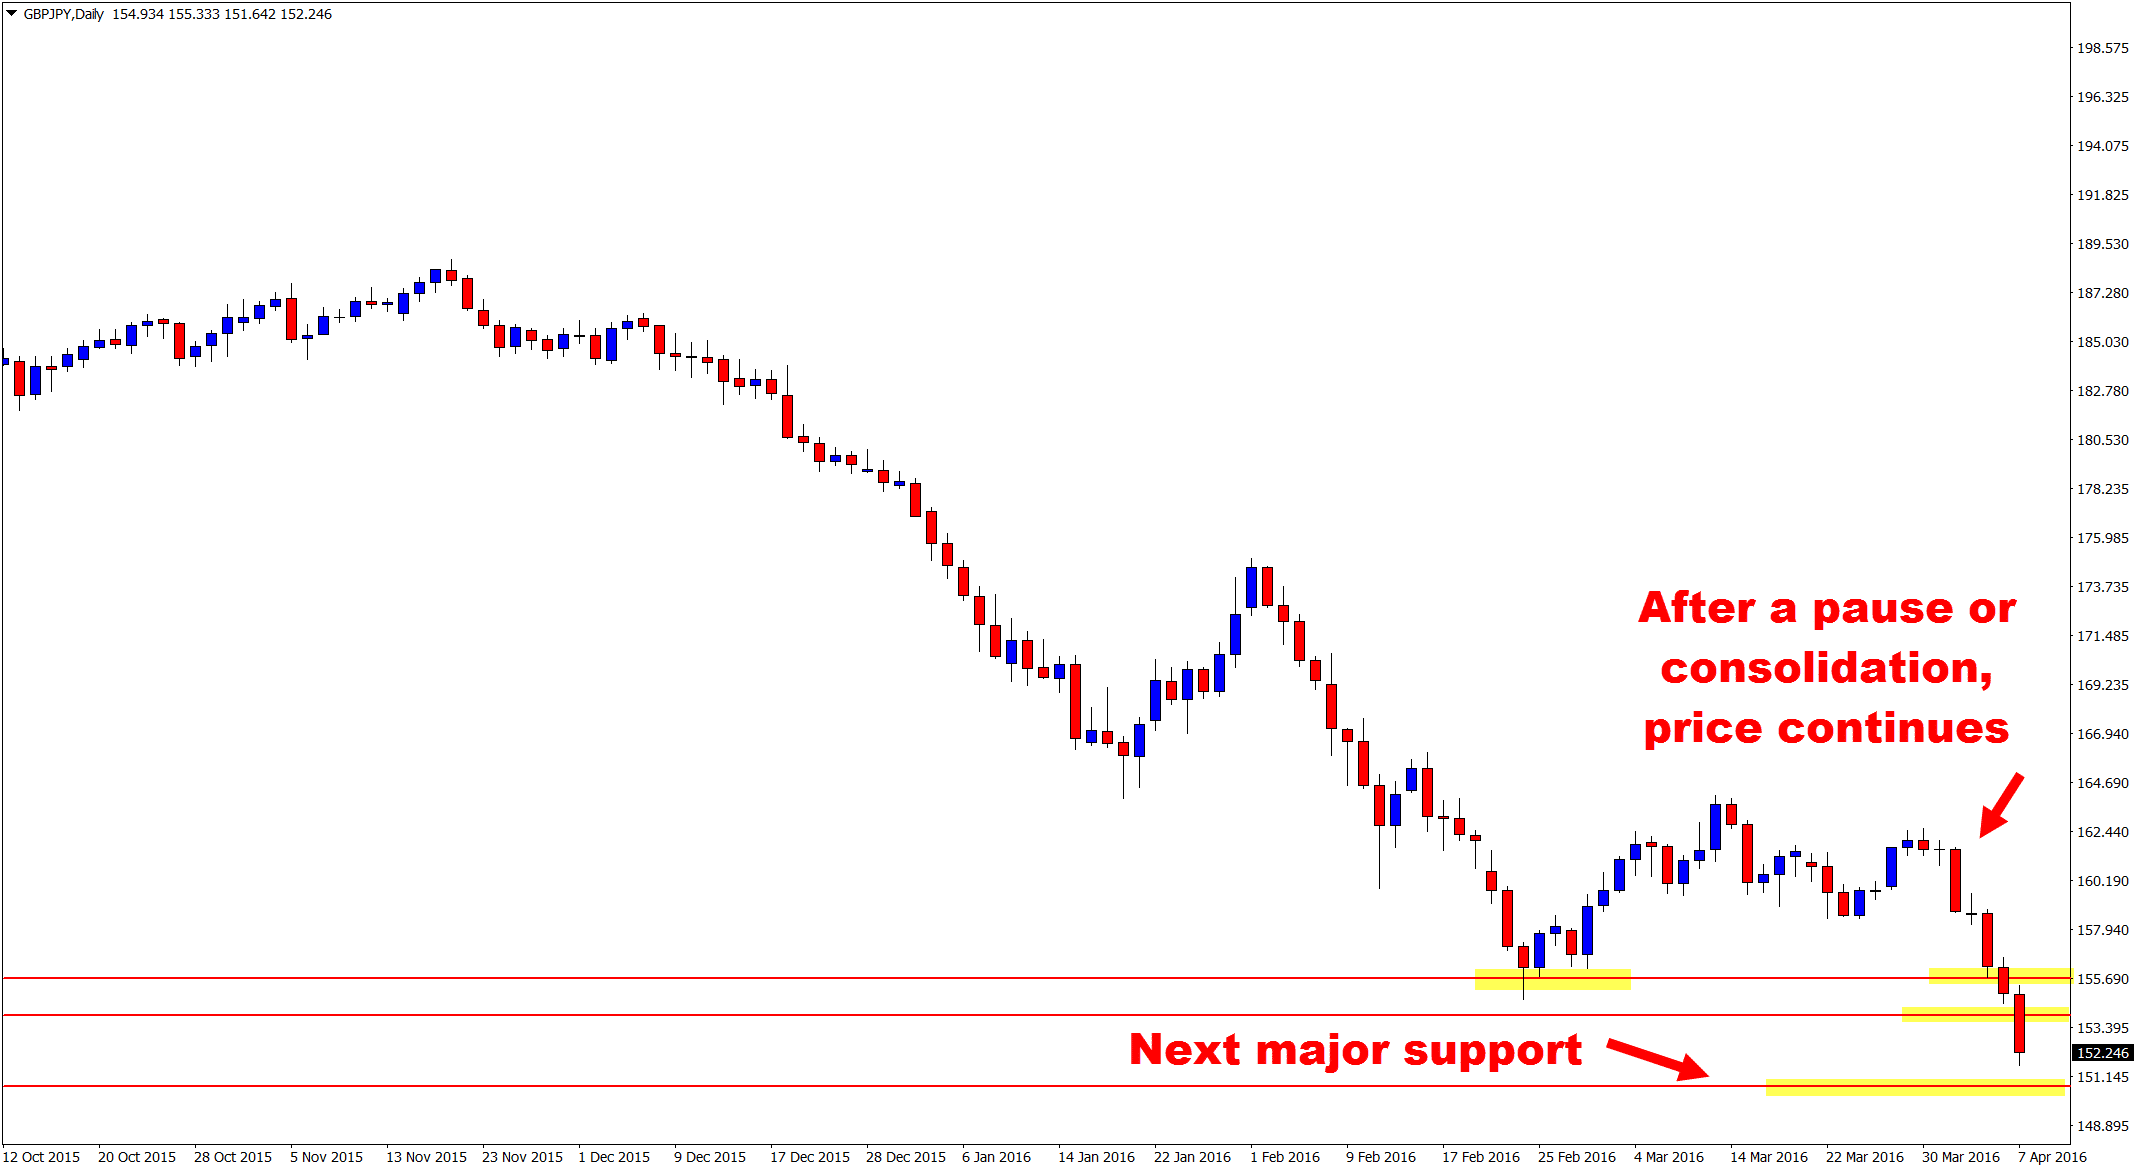 GBPJPY zoomed in